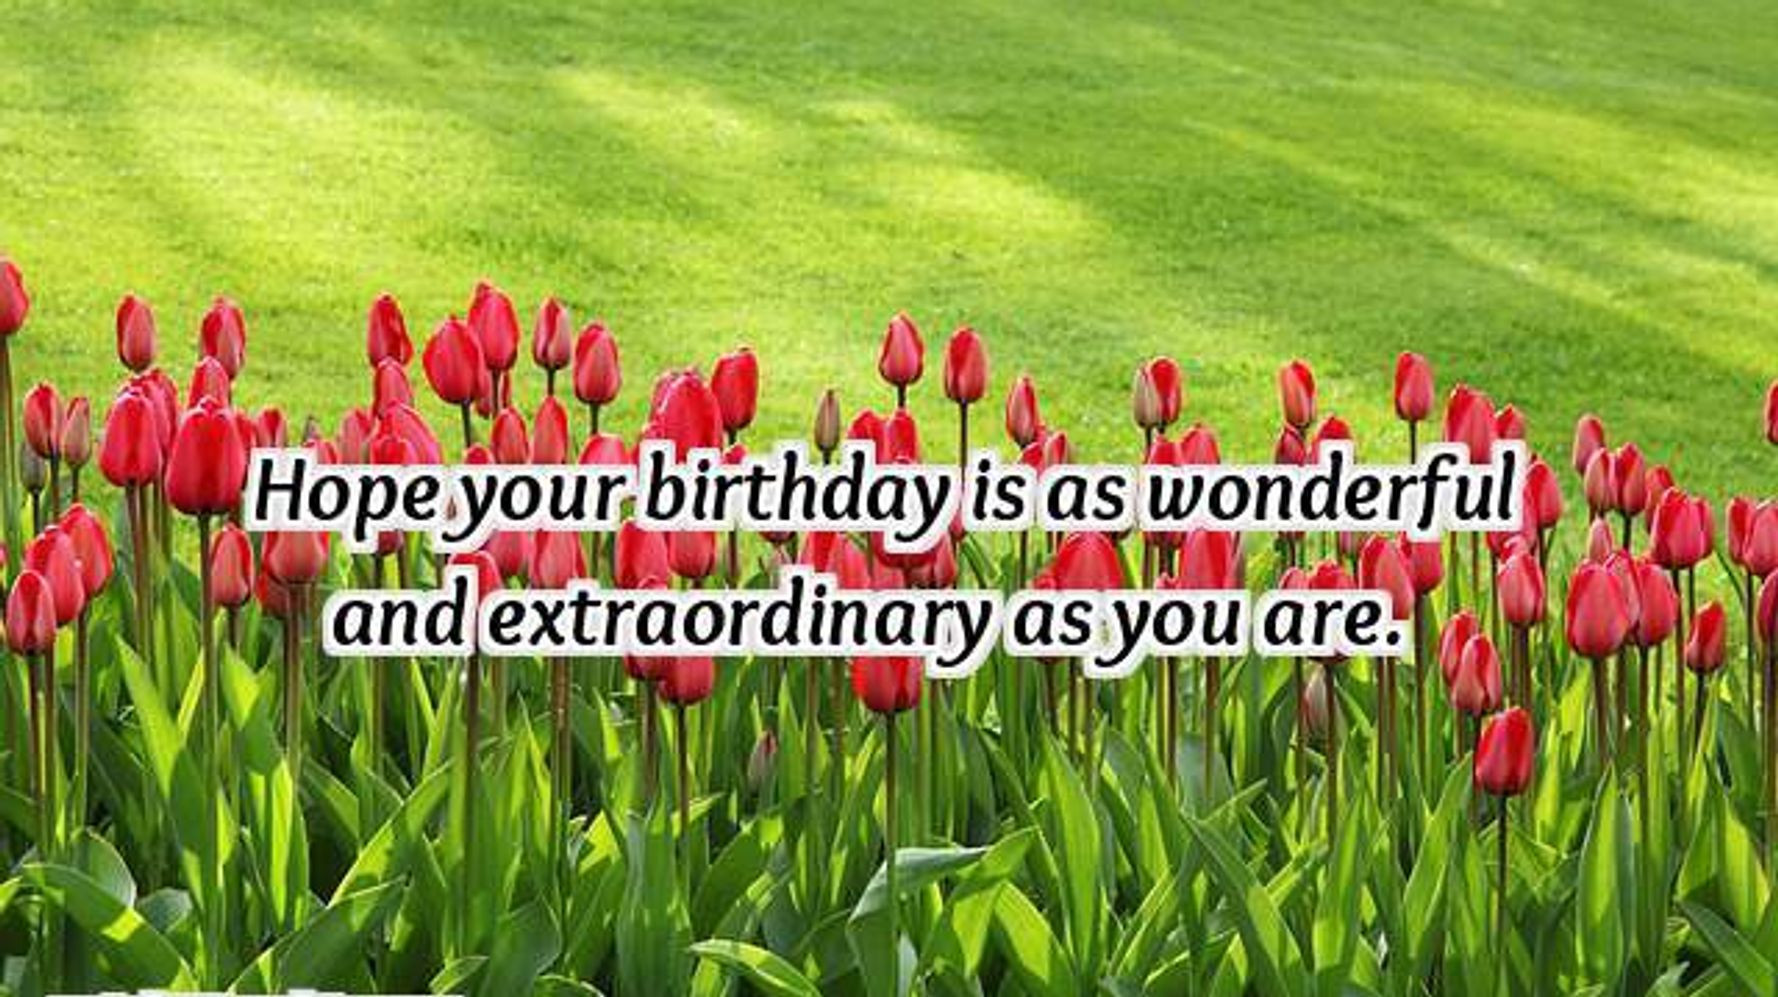 Best Wishes For Your Birthday
 23 Birthday Wishes for Friends & Best Friend Happy